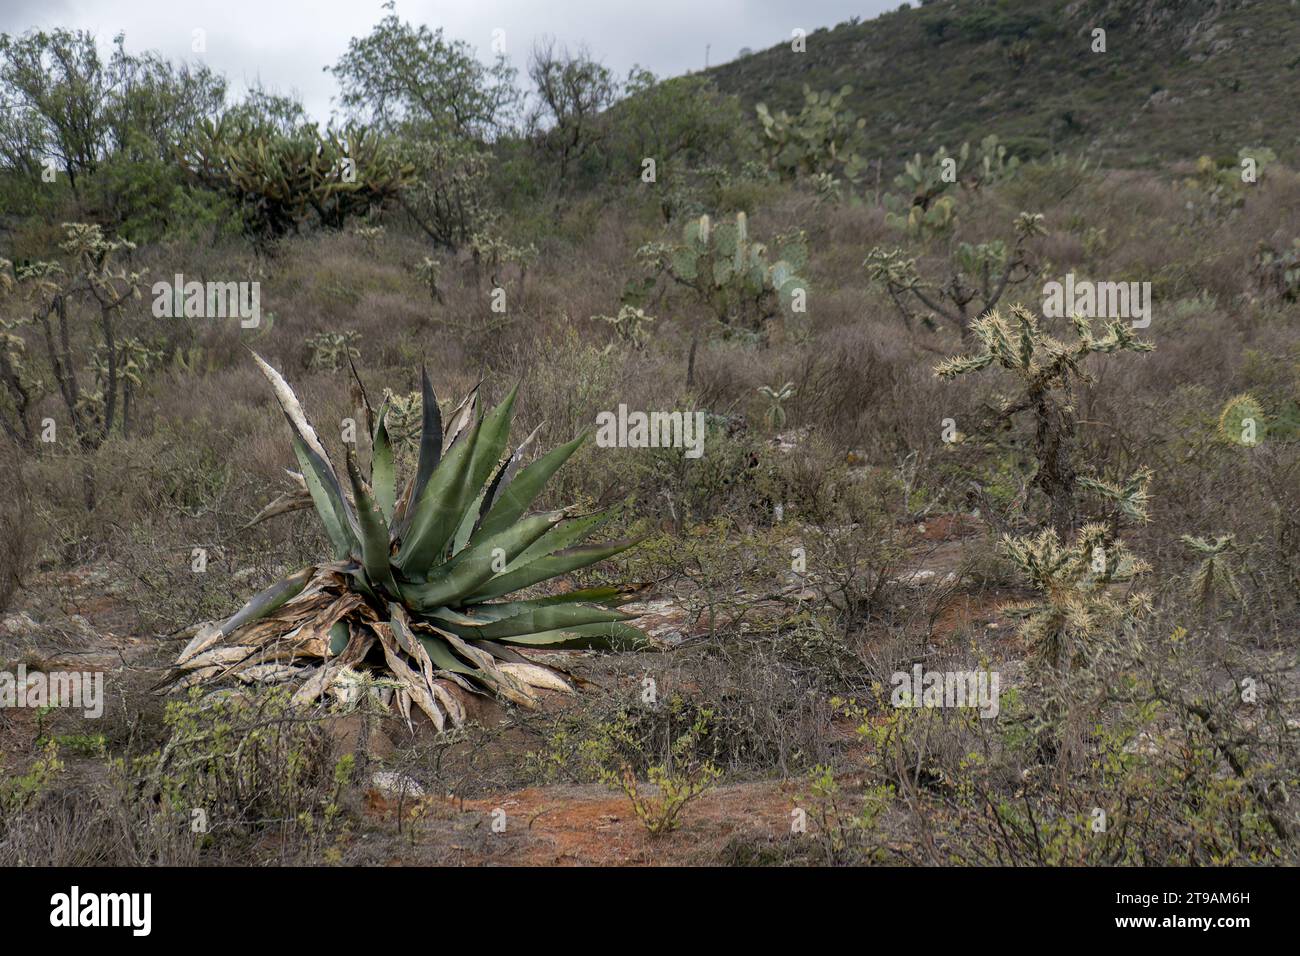 A Mexican landscape with Agave salmiana, bushes and space for text on the right Stock Photo